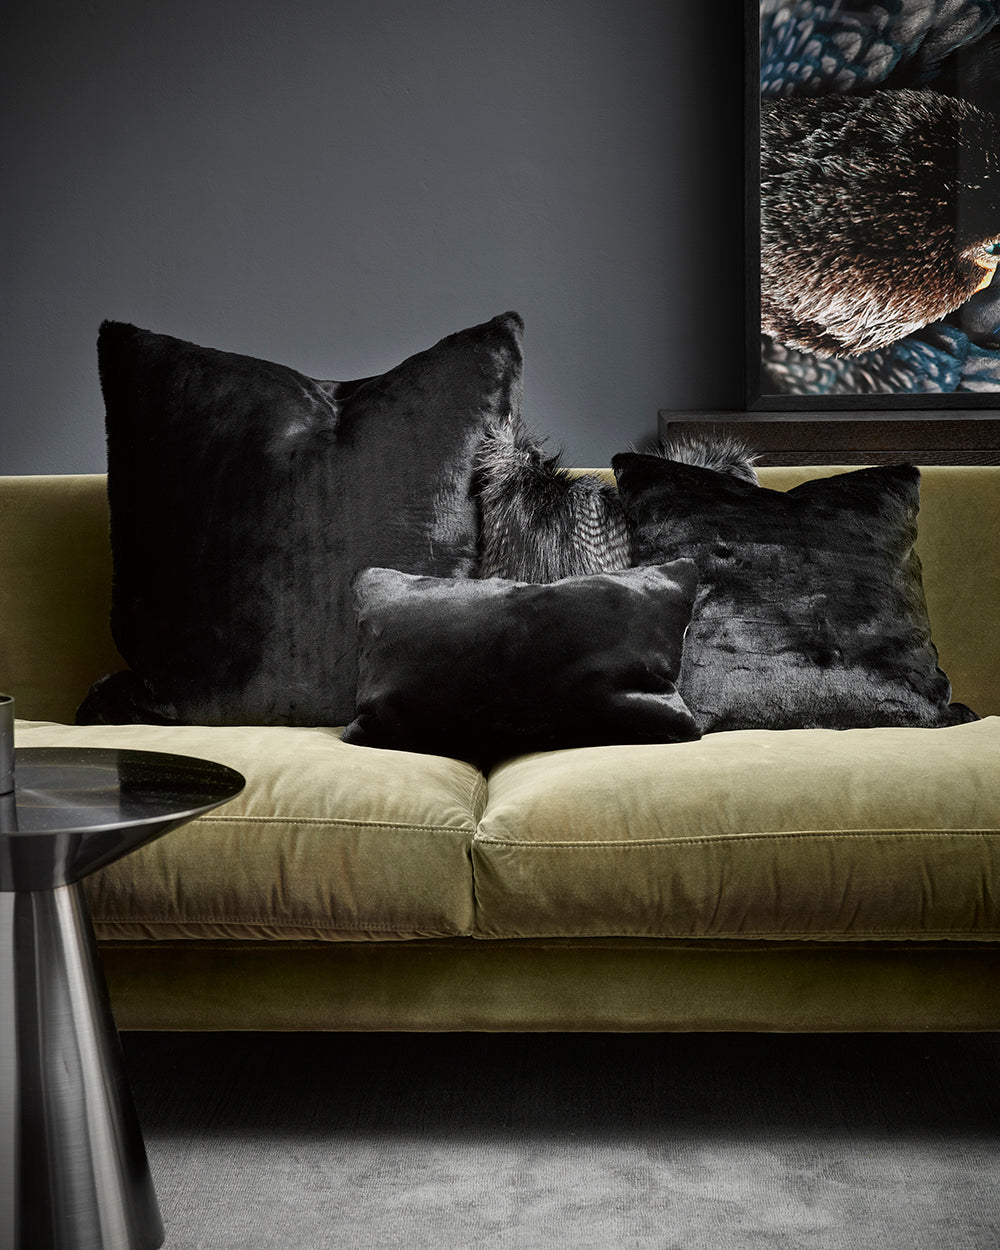 Heirloom Black Panther Cushions in Faux Fur are available from Make Your House A Home Premium Stockist. Furniture Store Bendigo, Victoria. Australia Wide Delivery. Furtex Baya.